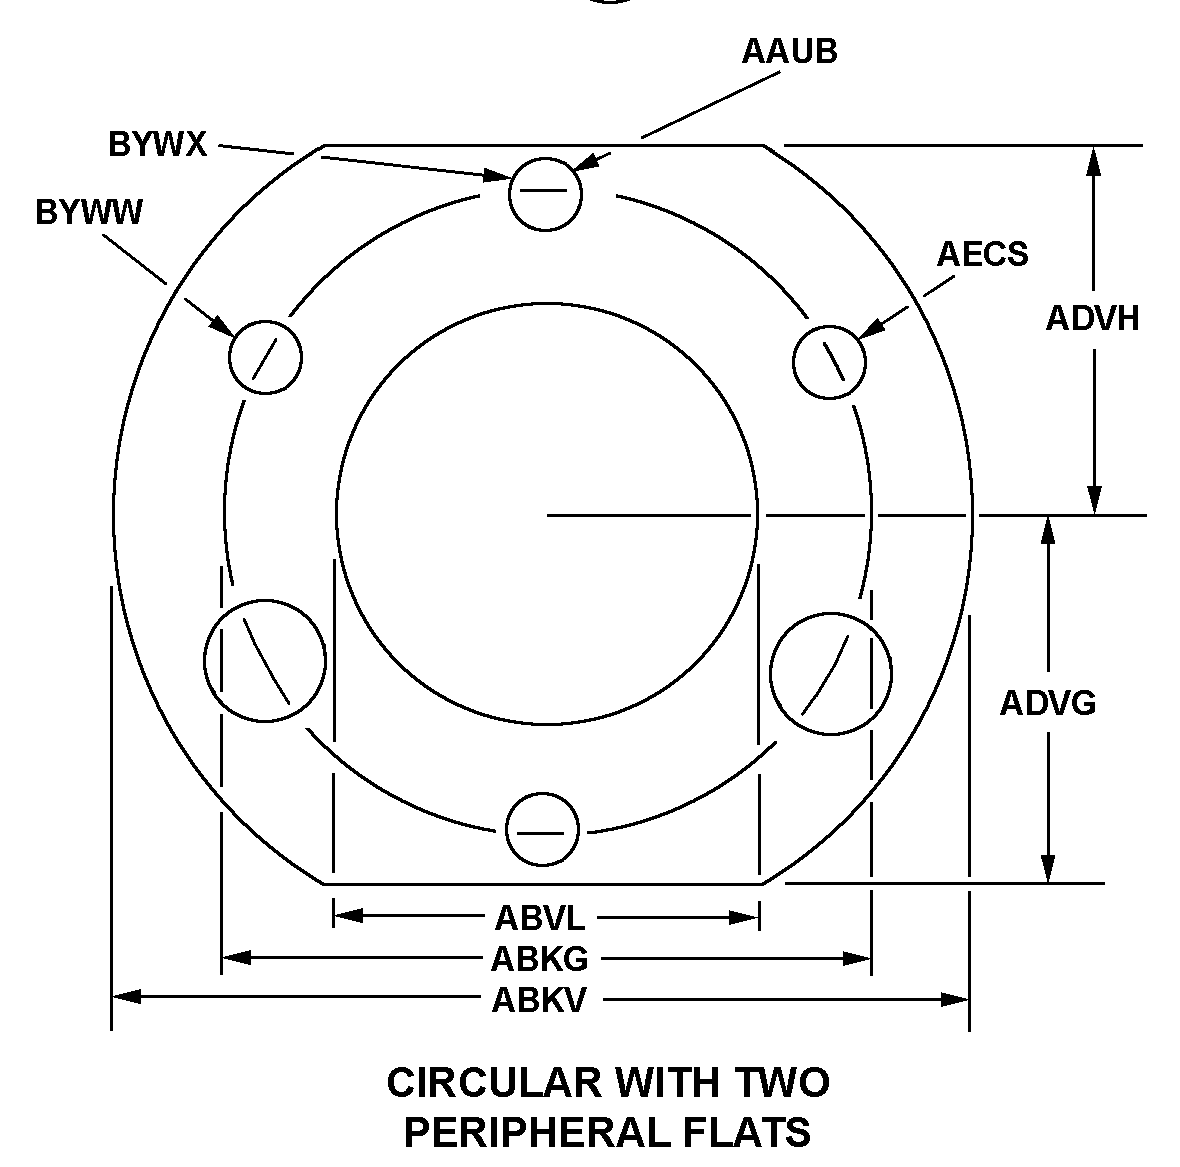 CIRCULAR WITH TWO PERIPHERAL FLATS style nsn 5330-01-568-9909